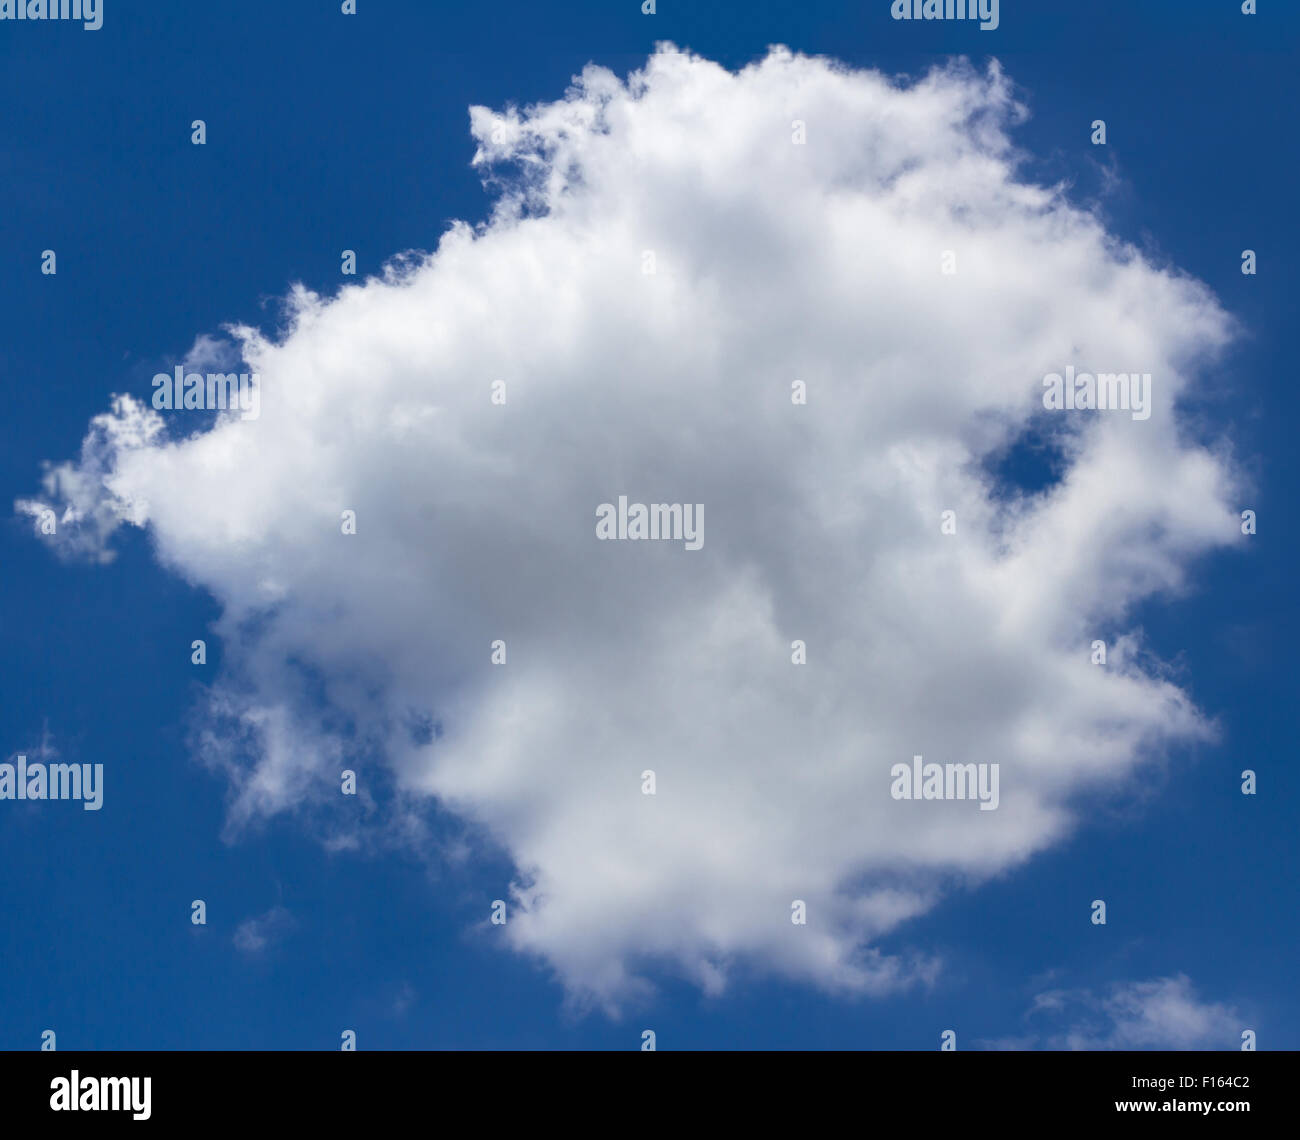 A cloud in the blue sky with the shape of a fish. Stock Photo